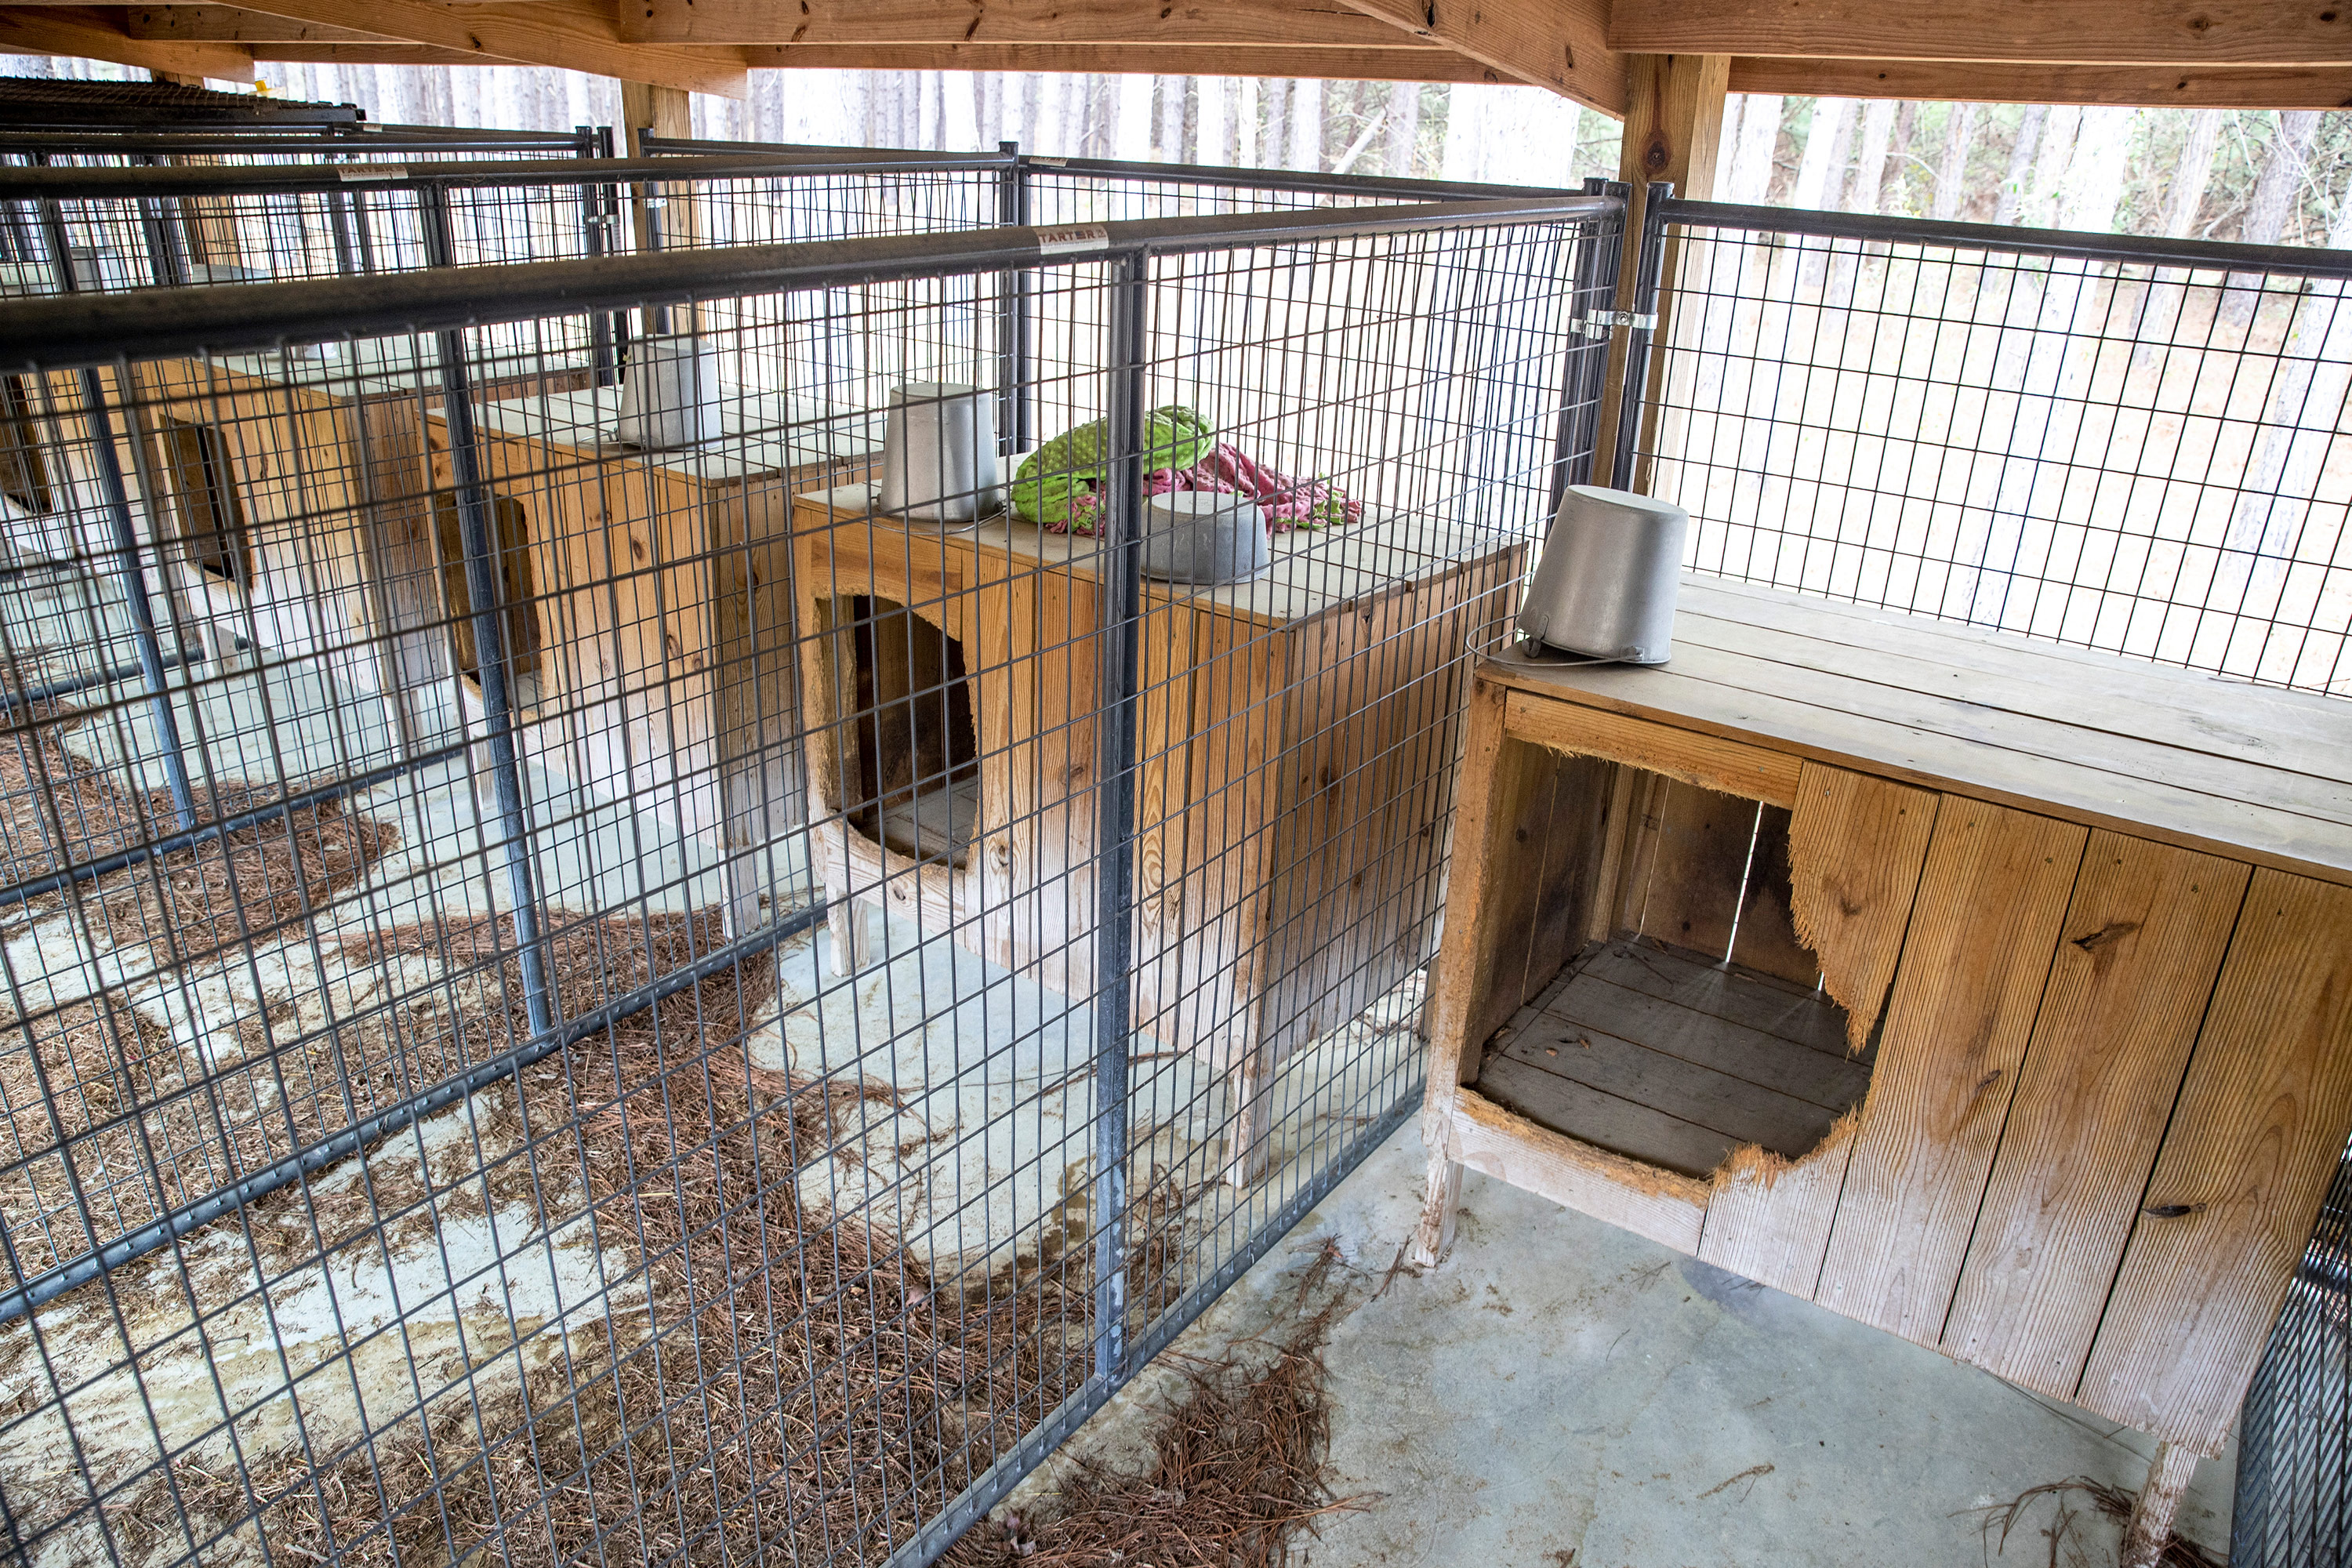 Dog kennels at Murdaugh's Moselle property in Islandton, South Carolina.